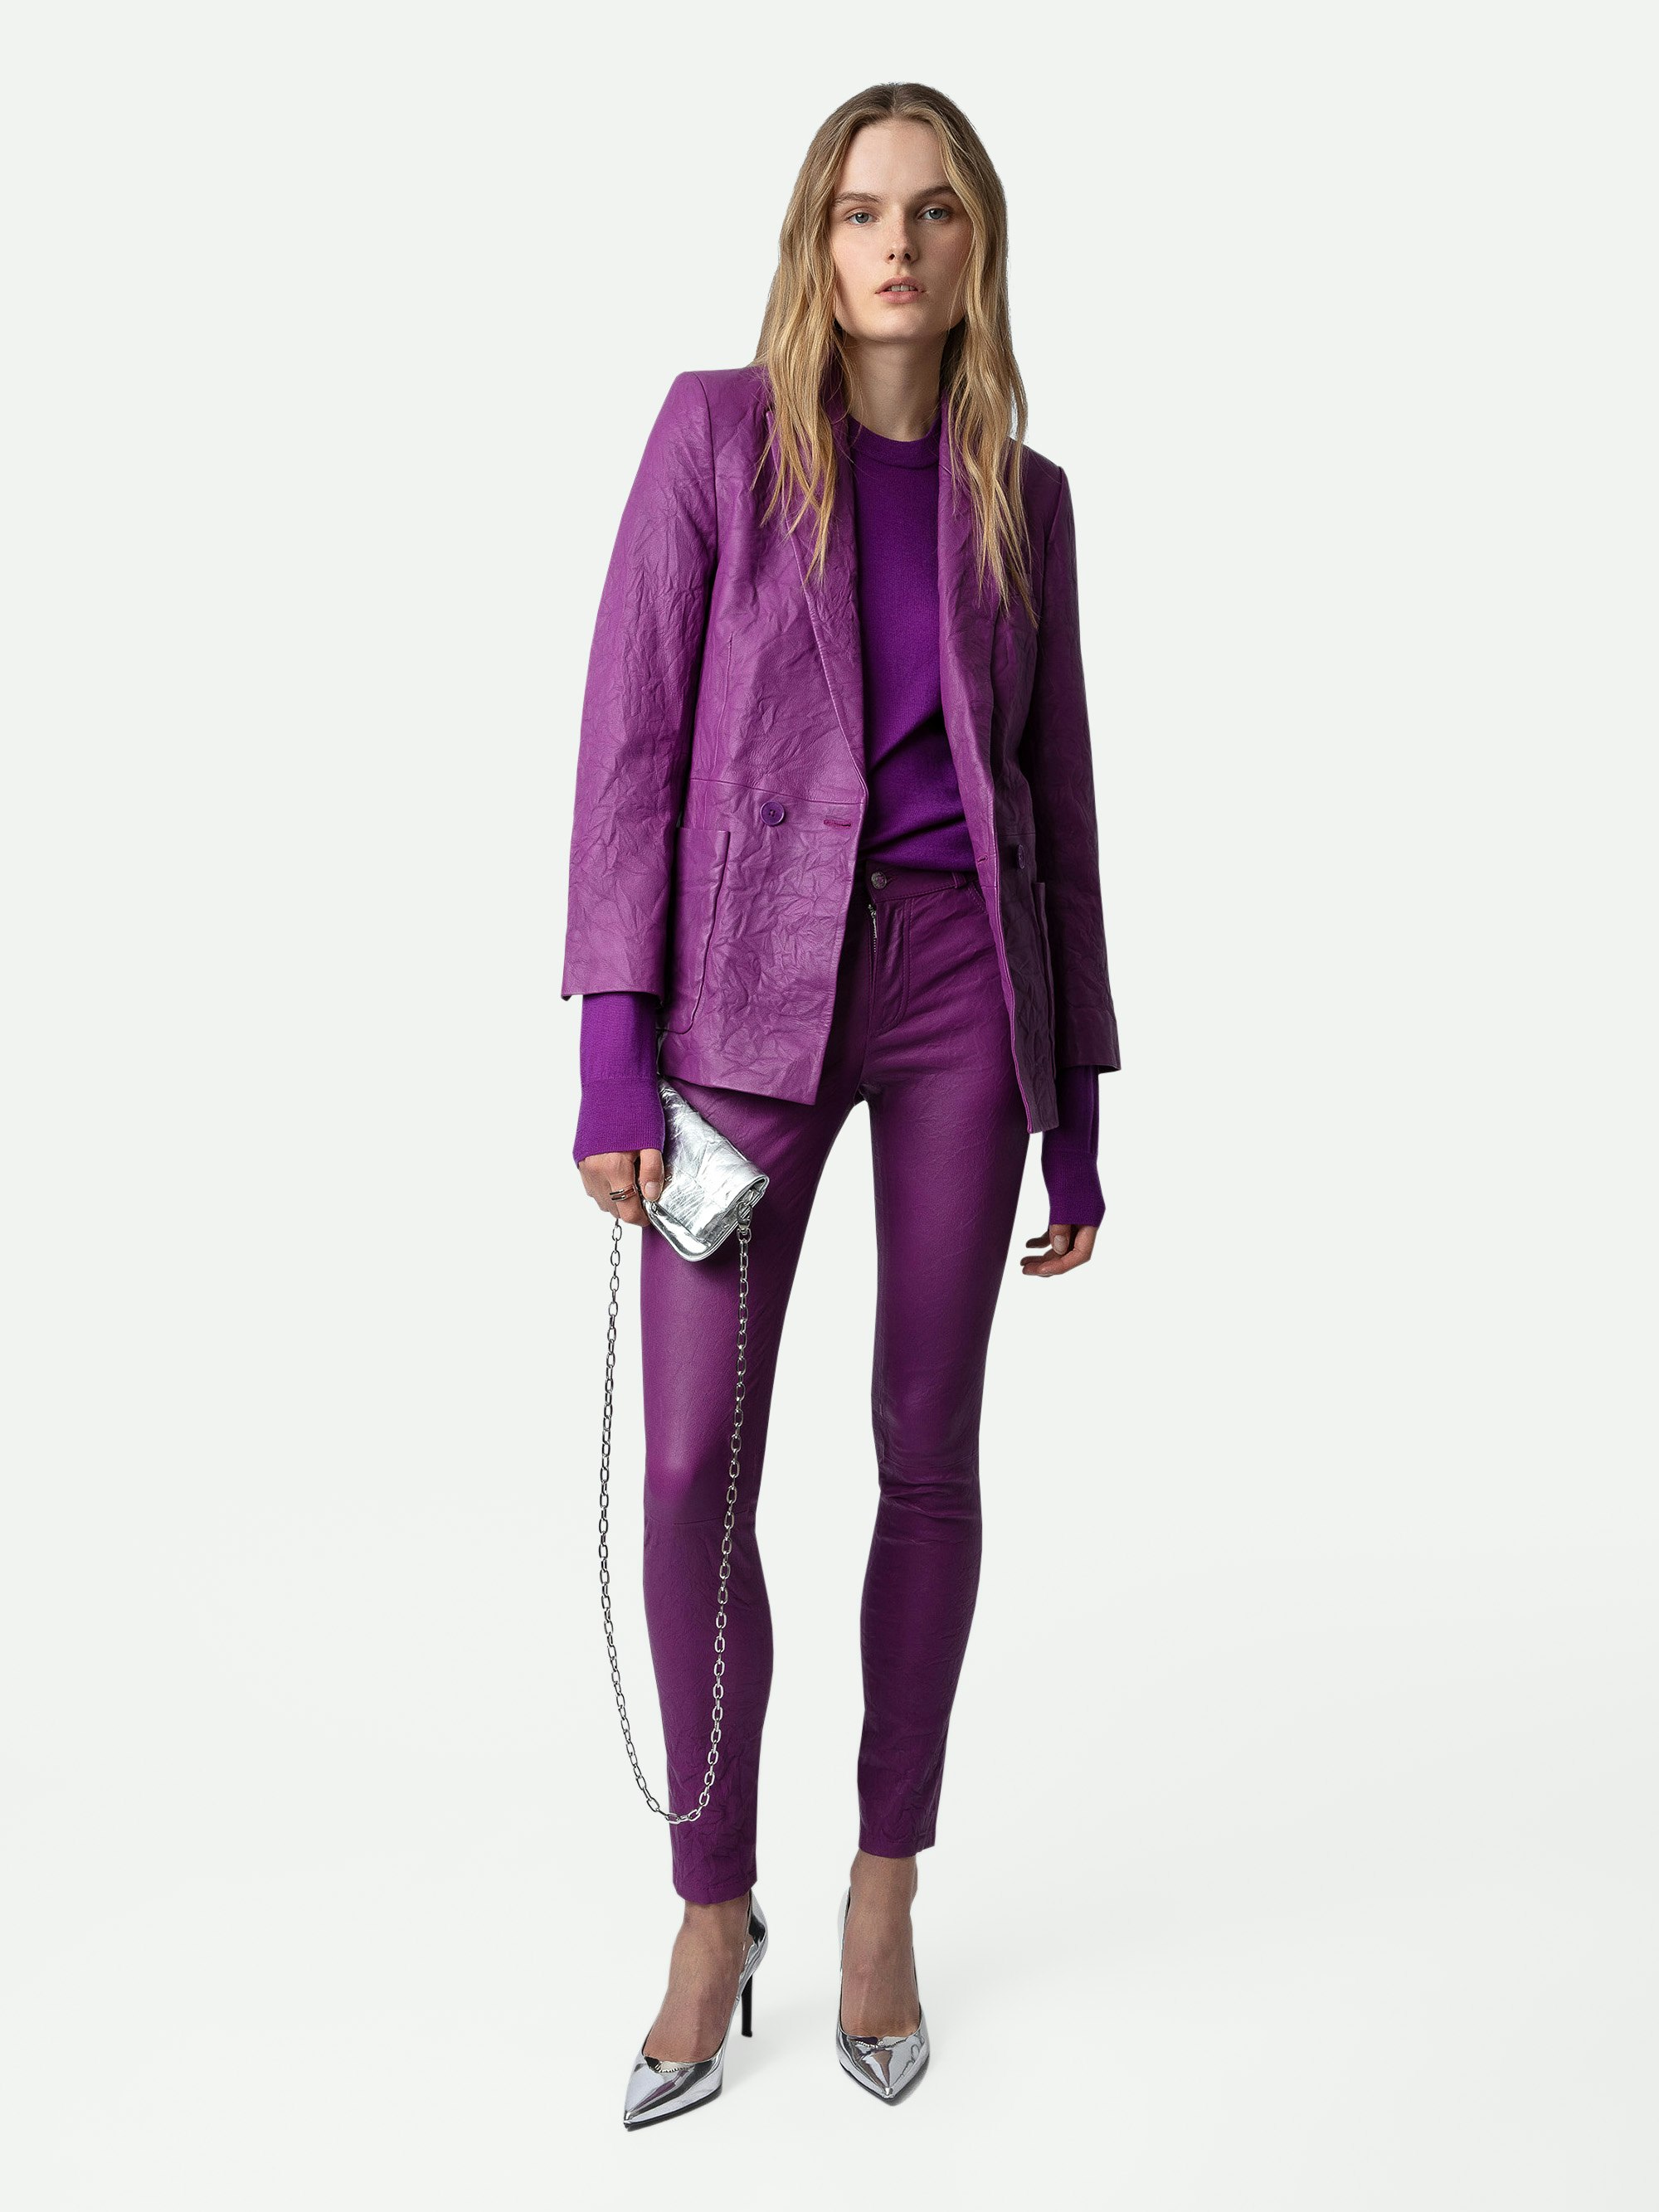 Phlame Crinkled Leather Trousers - Purple crinkled leather pants with pockets.